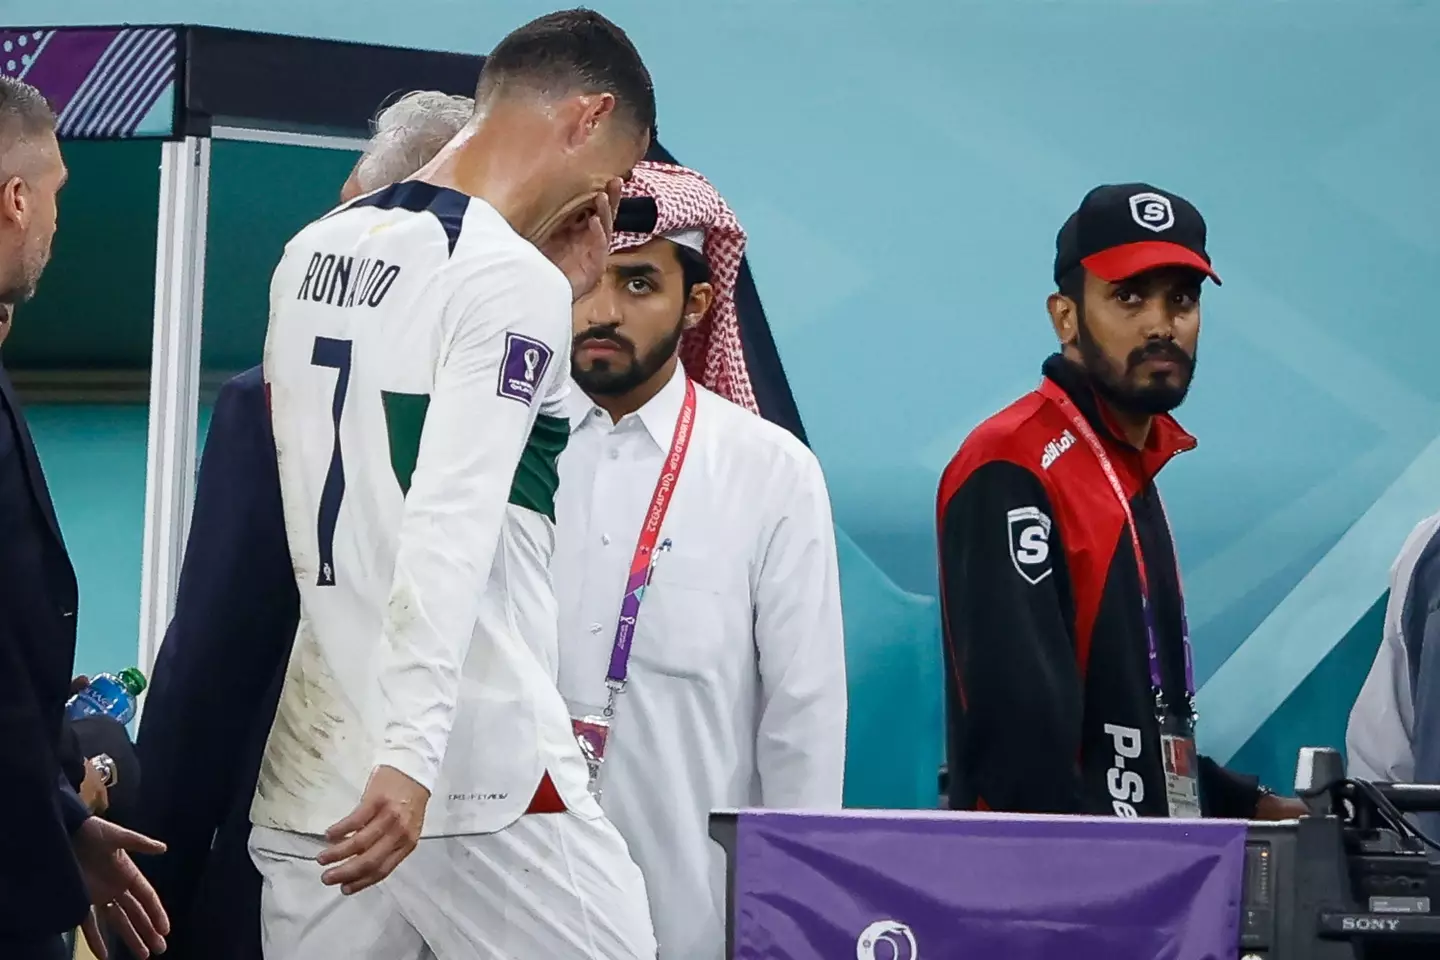 Cristiano Ronaldo's World Cup dream ended in tears.